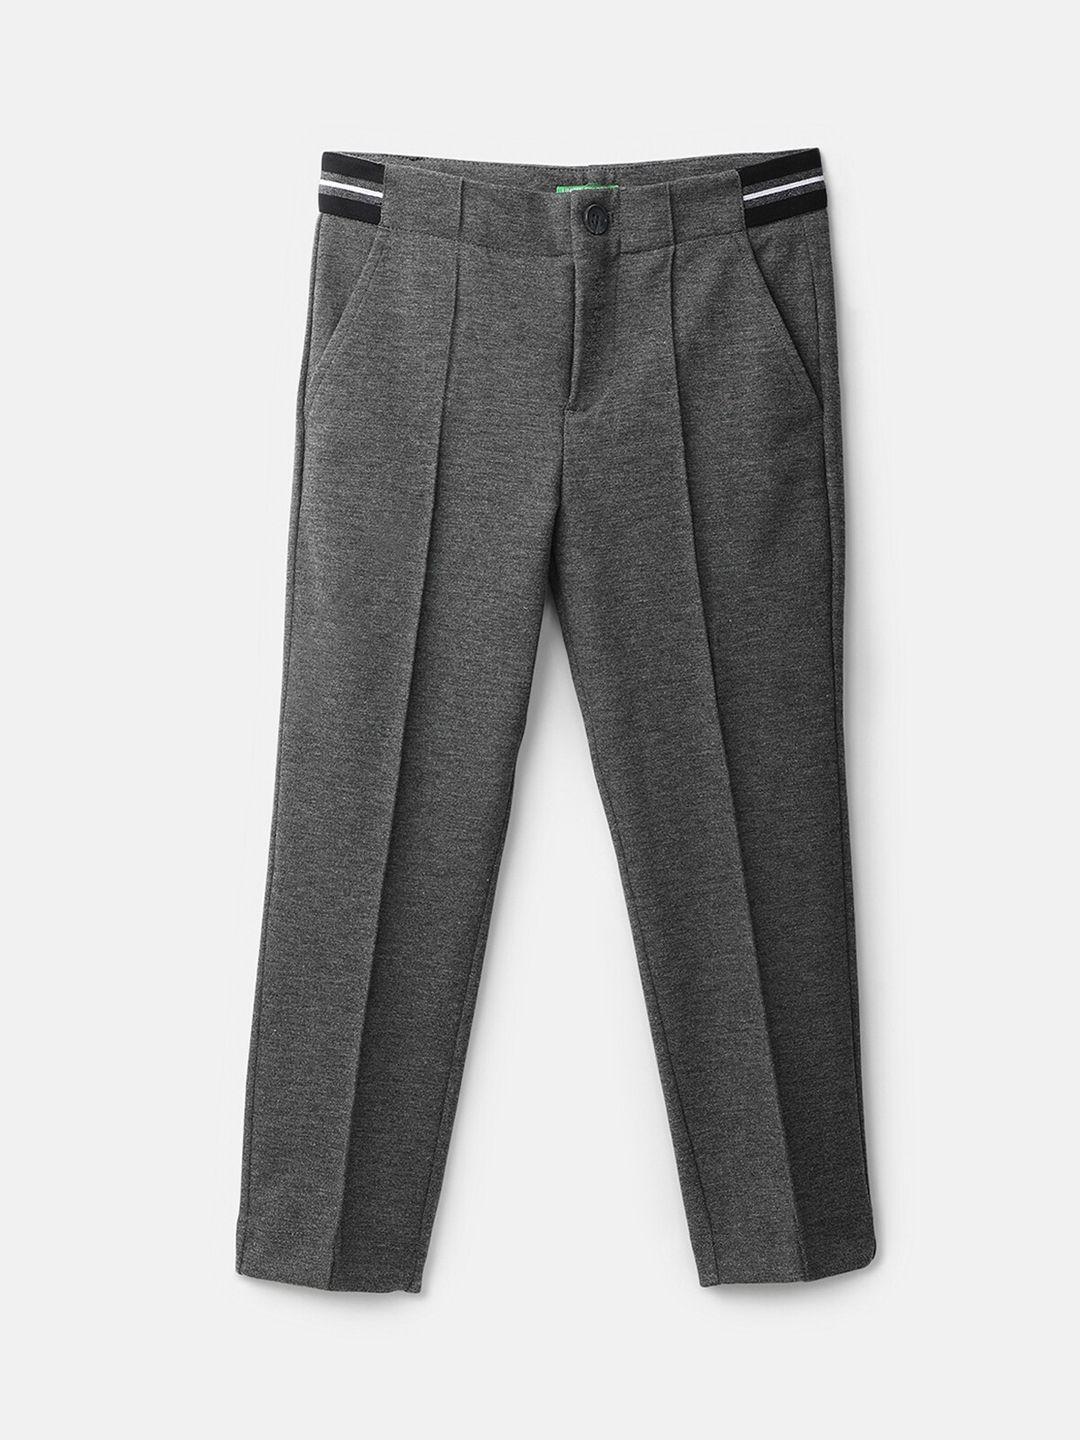 United Colors of Benetton Boys Grey Solid Slim Fit Pleated Trousers